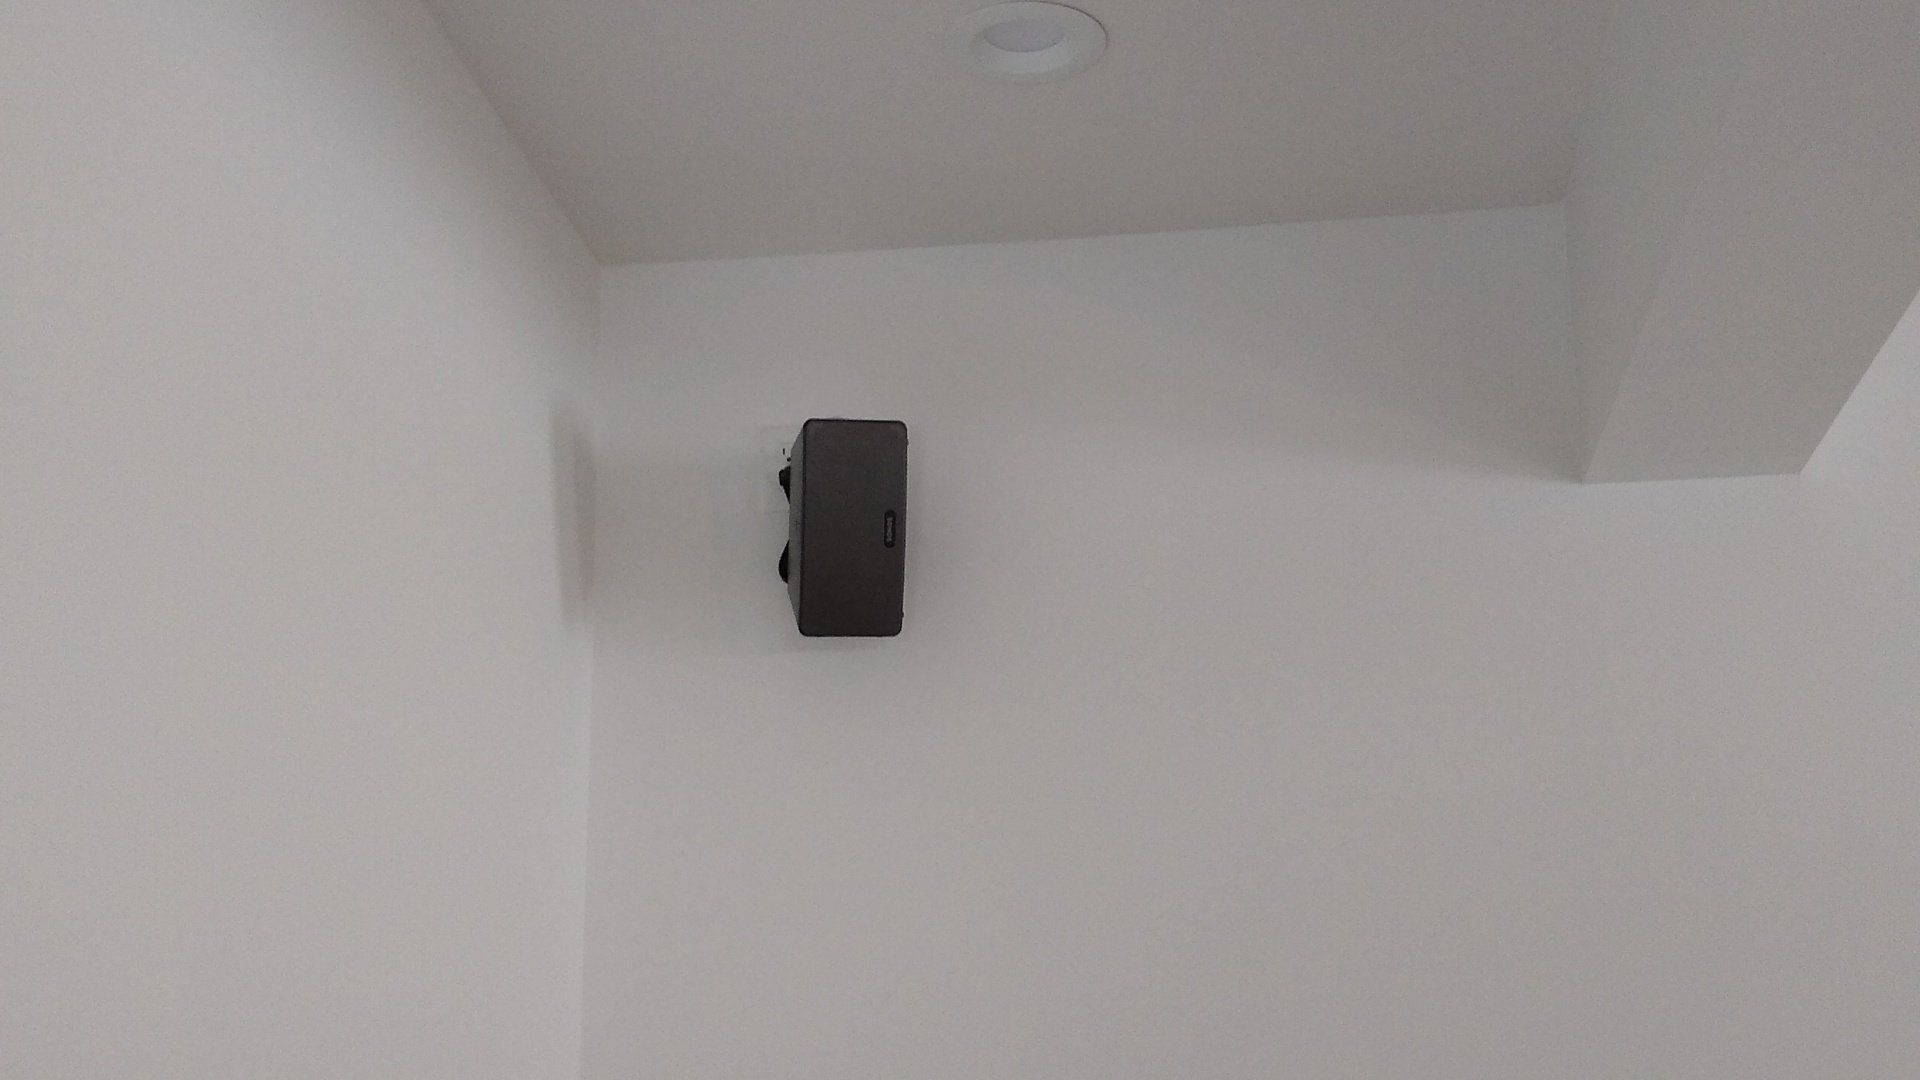 A black sonos speaker mounted on a wall by fisher electronics in northern ohio.